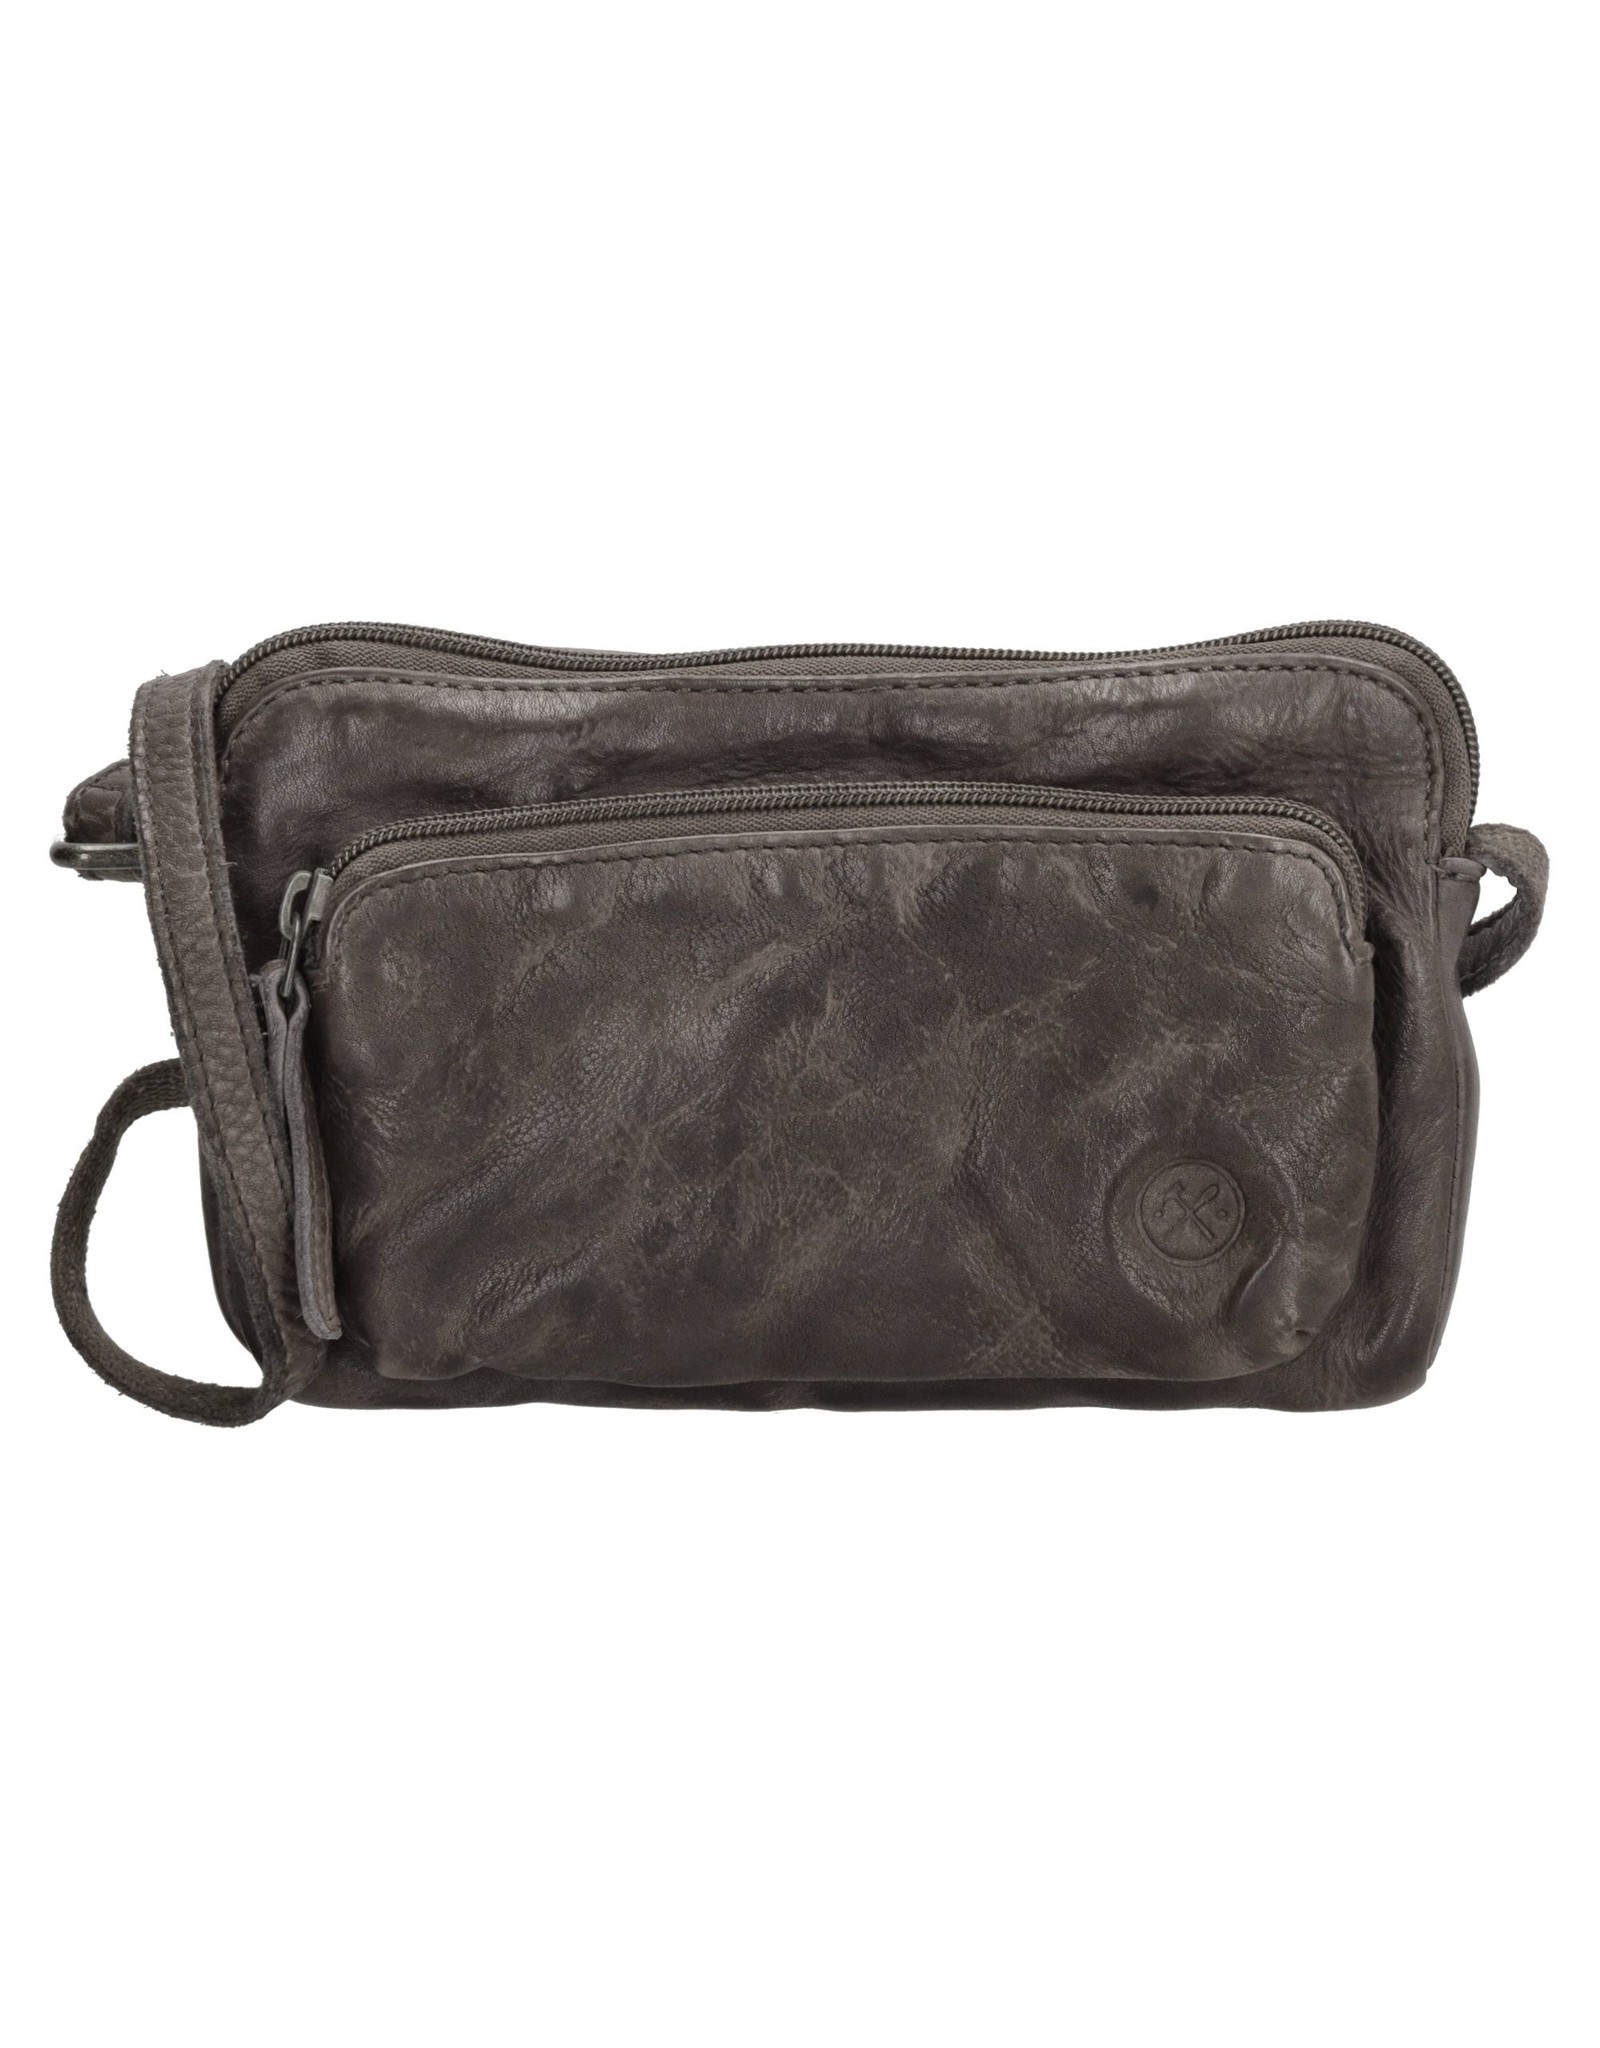 Hide & Stitches Leather Festival bags, waist bags and belt bags - Hide & Stitches Festival Bag Washed Leather Taupe